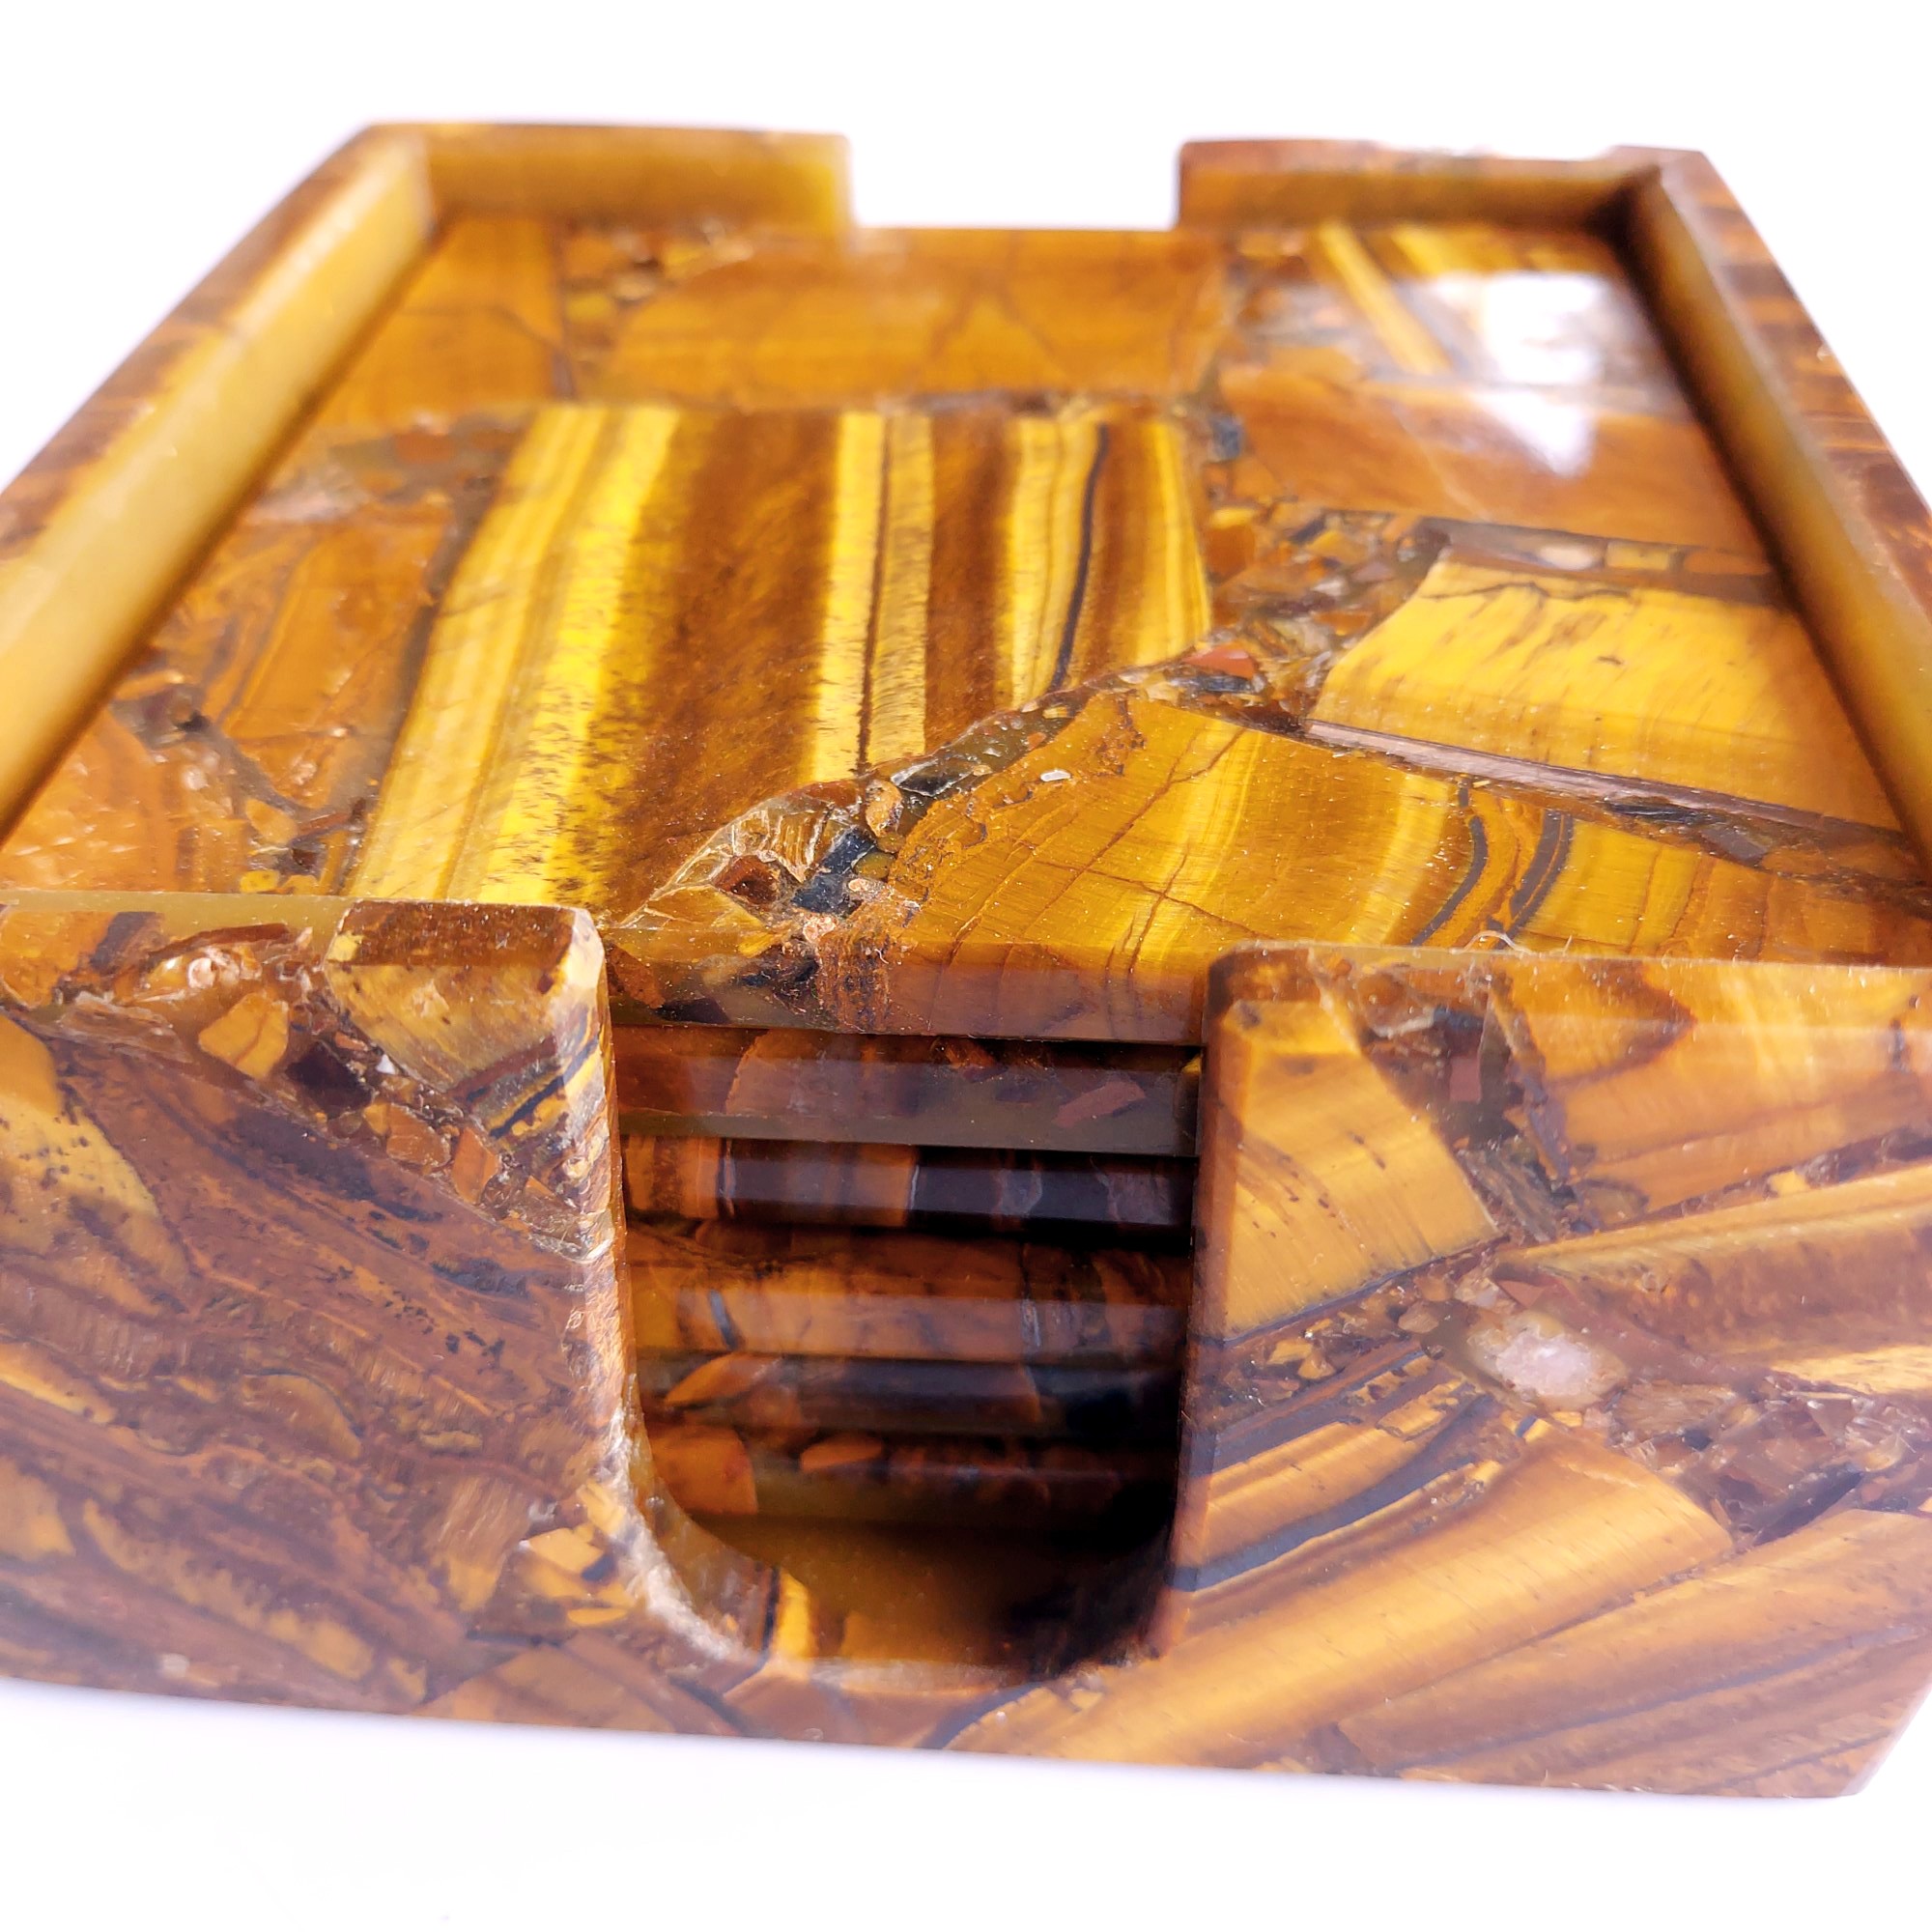 Natural Tiger Eye Square coaster set of 6pcs with 1 holder gemstone 4inch coasters for drink